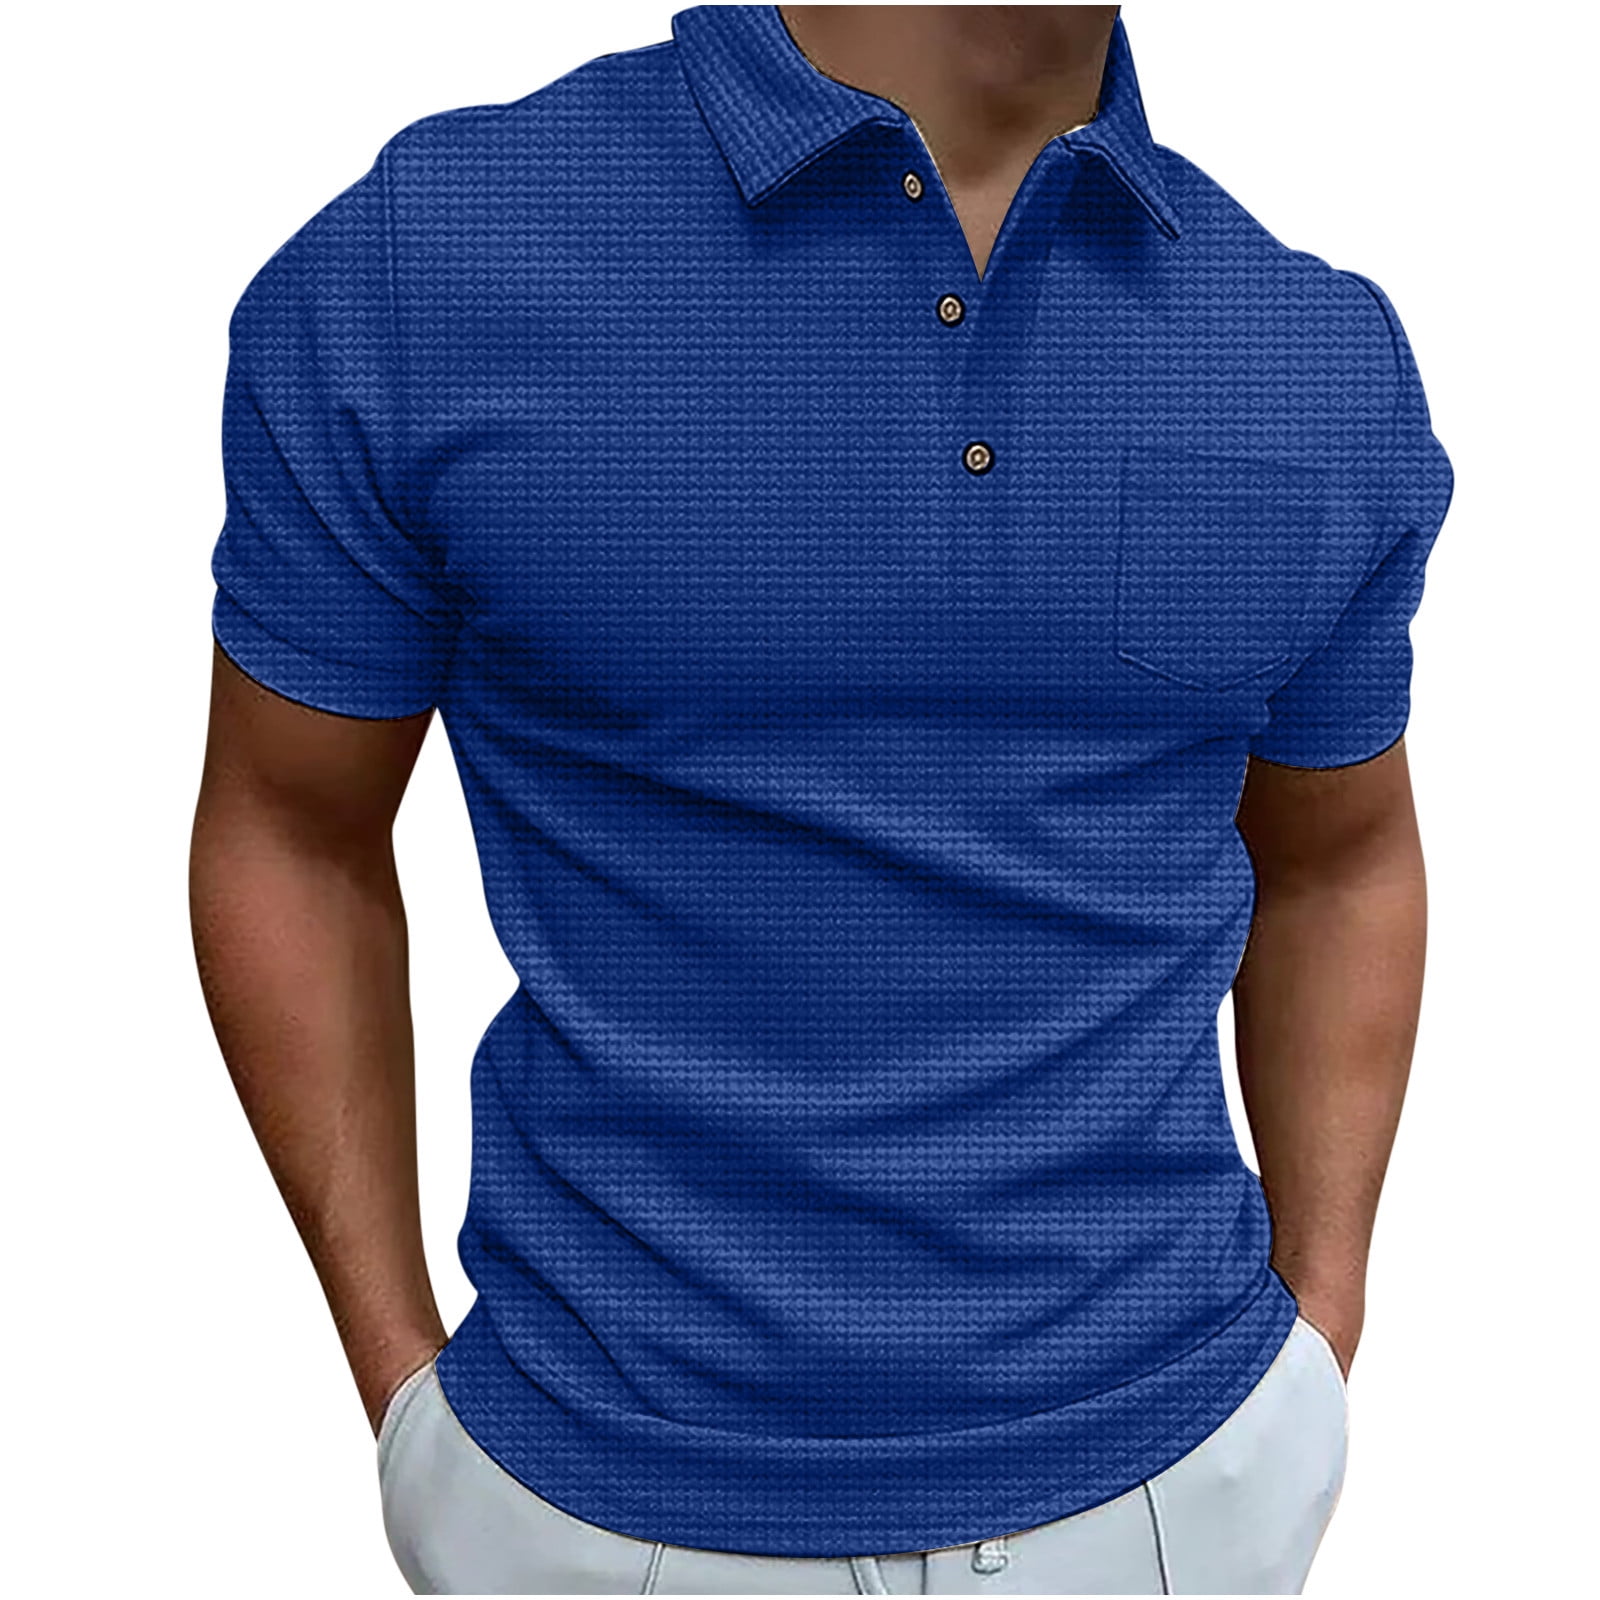 YYDGH Men's Polo Shirts Athletic Short Sleeve Polo Shirts Cotton Blend ...